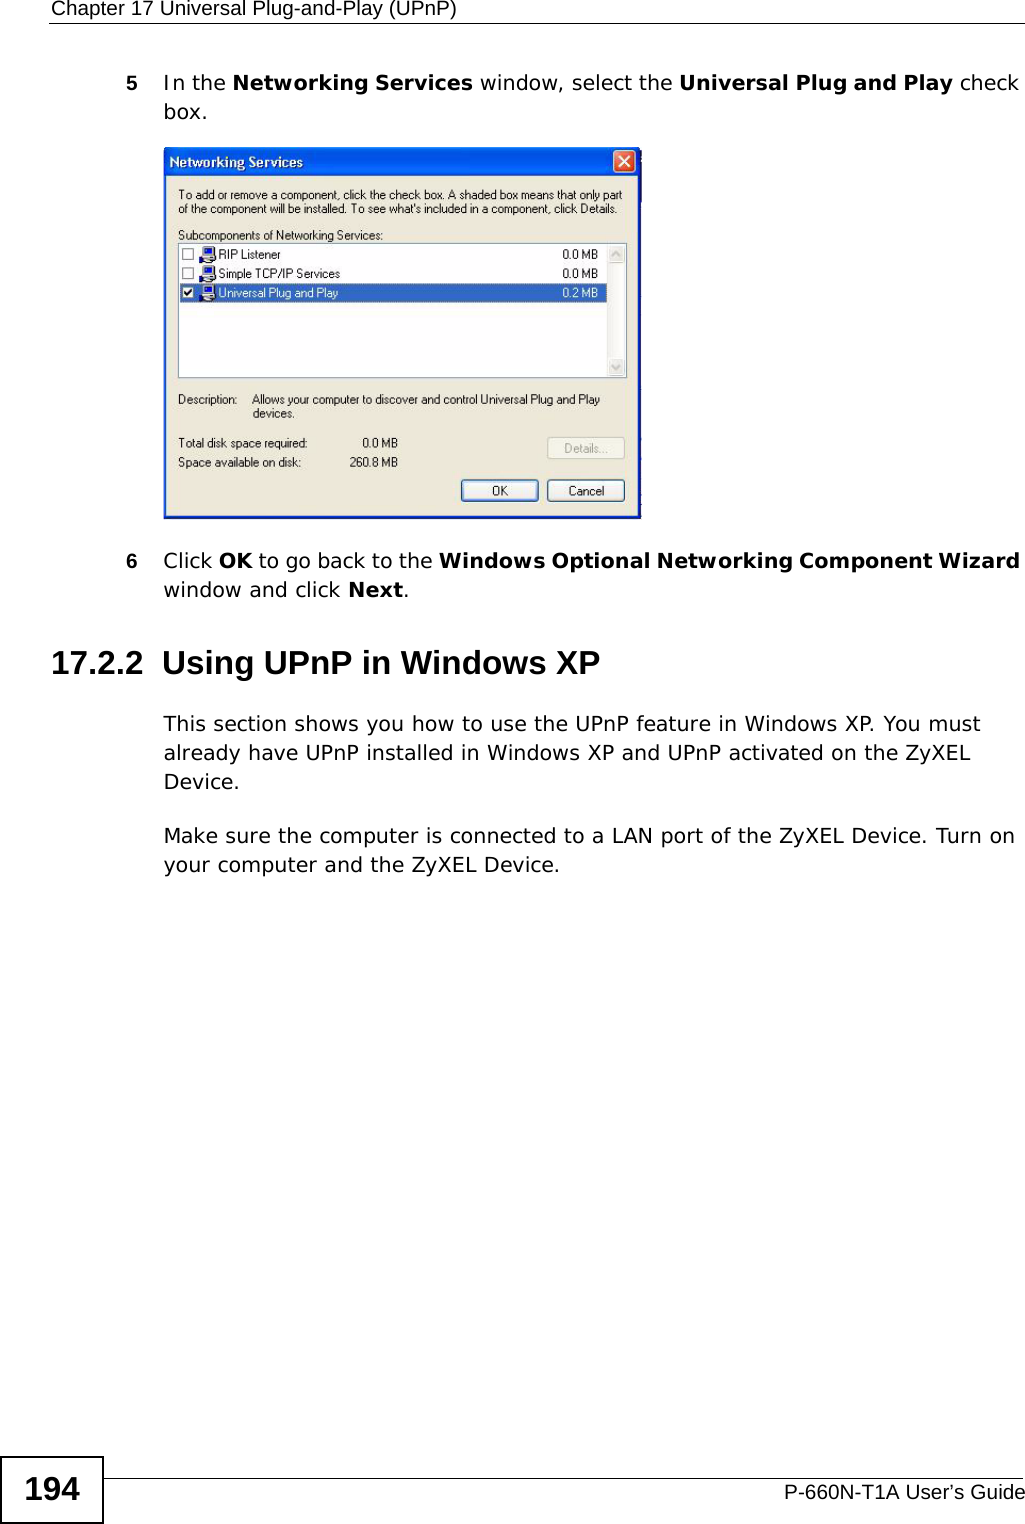 Chapter 17 Universal Plug-and-Play (UPnP)P-660N-T1A User’s Guide1945In the Networking Services window, select the Universal Plug and Play check box. Networking Services6Click OK to go back to the Windows Optional Networking Component Wizard window and click Next. 17.2.2  Using UPnP in Windows XPThis section shows you how to use the UPnP feature in Windows XP. You must already have UPnP installed in Windows XP and UPnP activated on the ZyXEL Device.Make sure the computer is connected to a LAN port of the ZyXEL Device. Turn on your computer and the ZyXEL Device. 